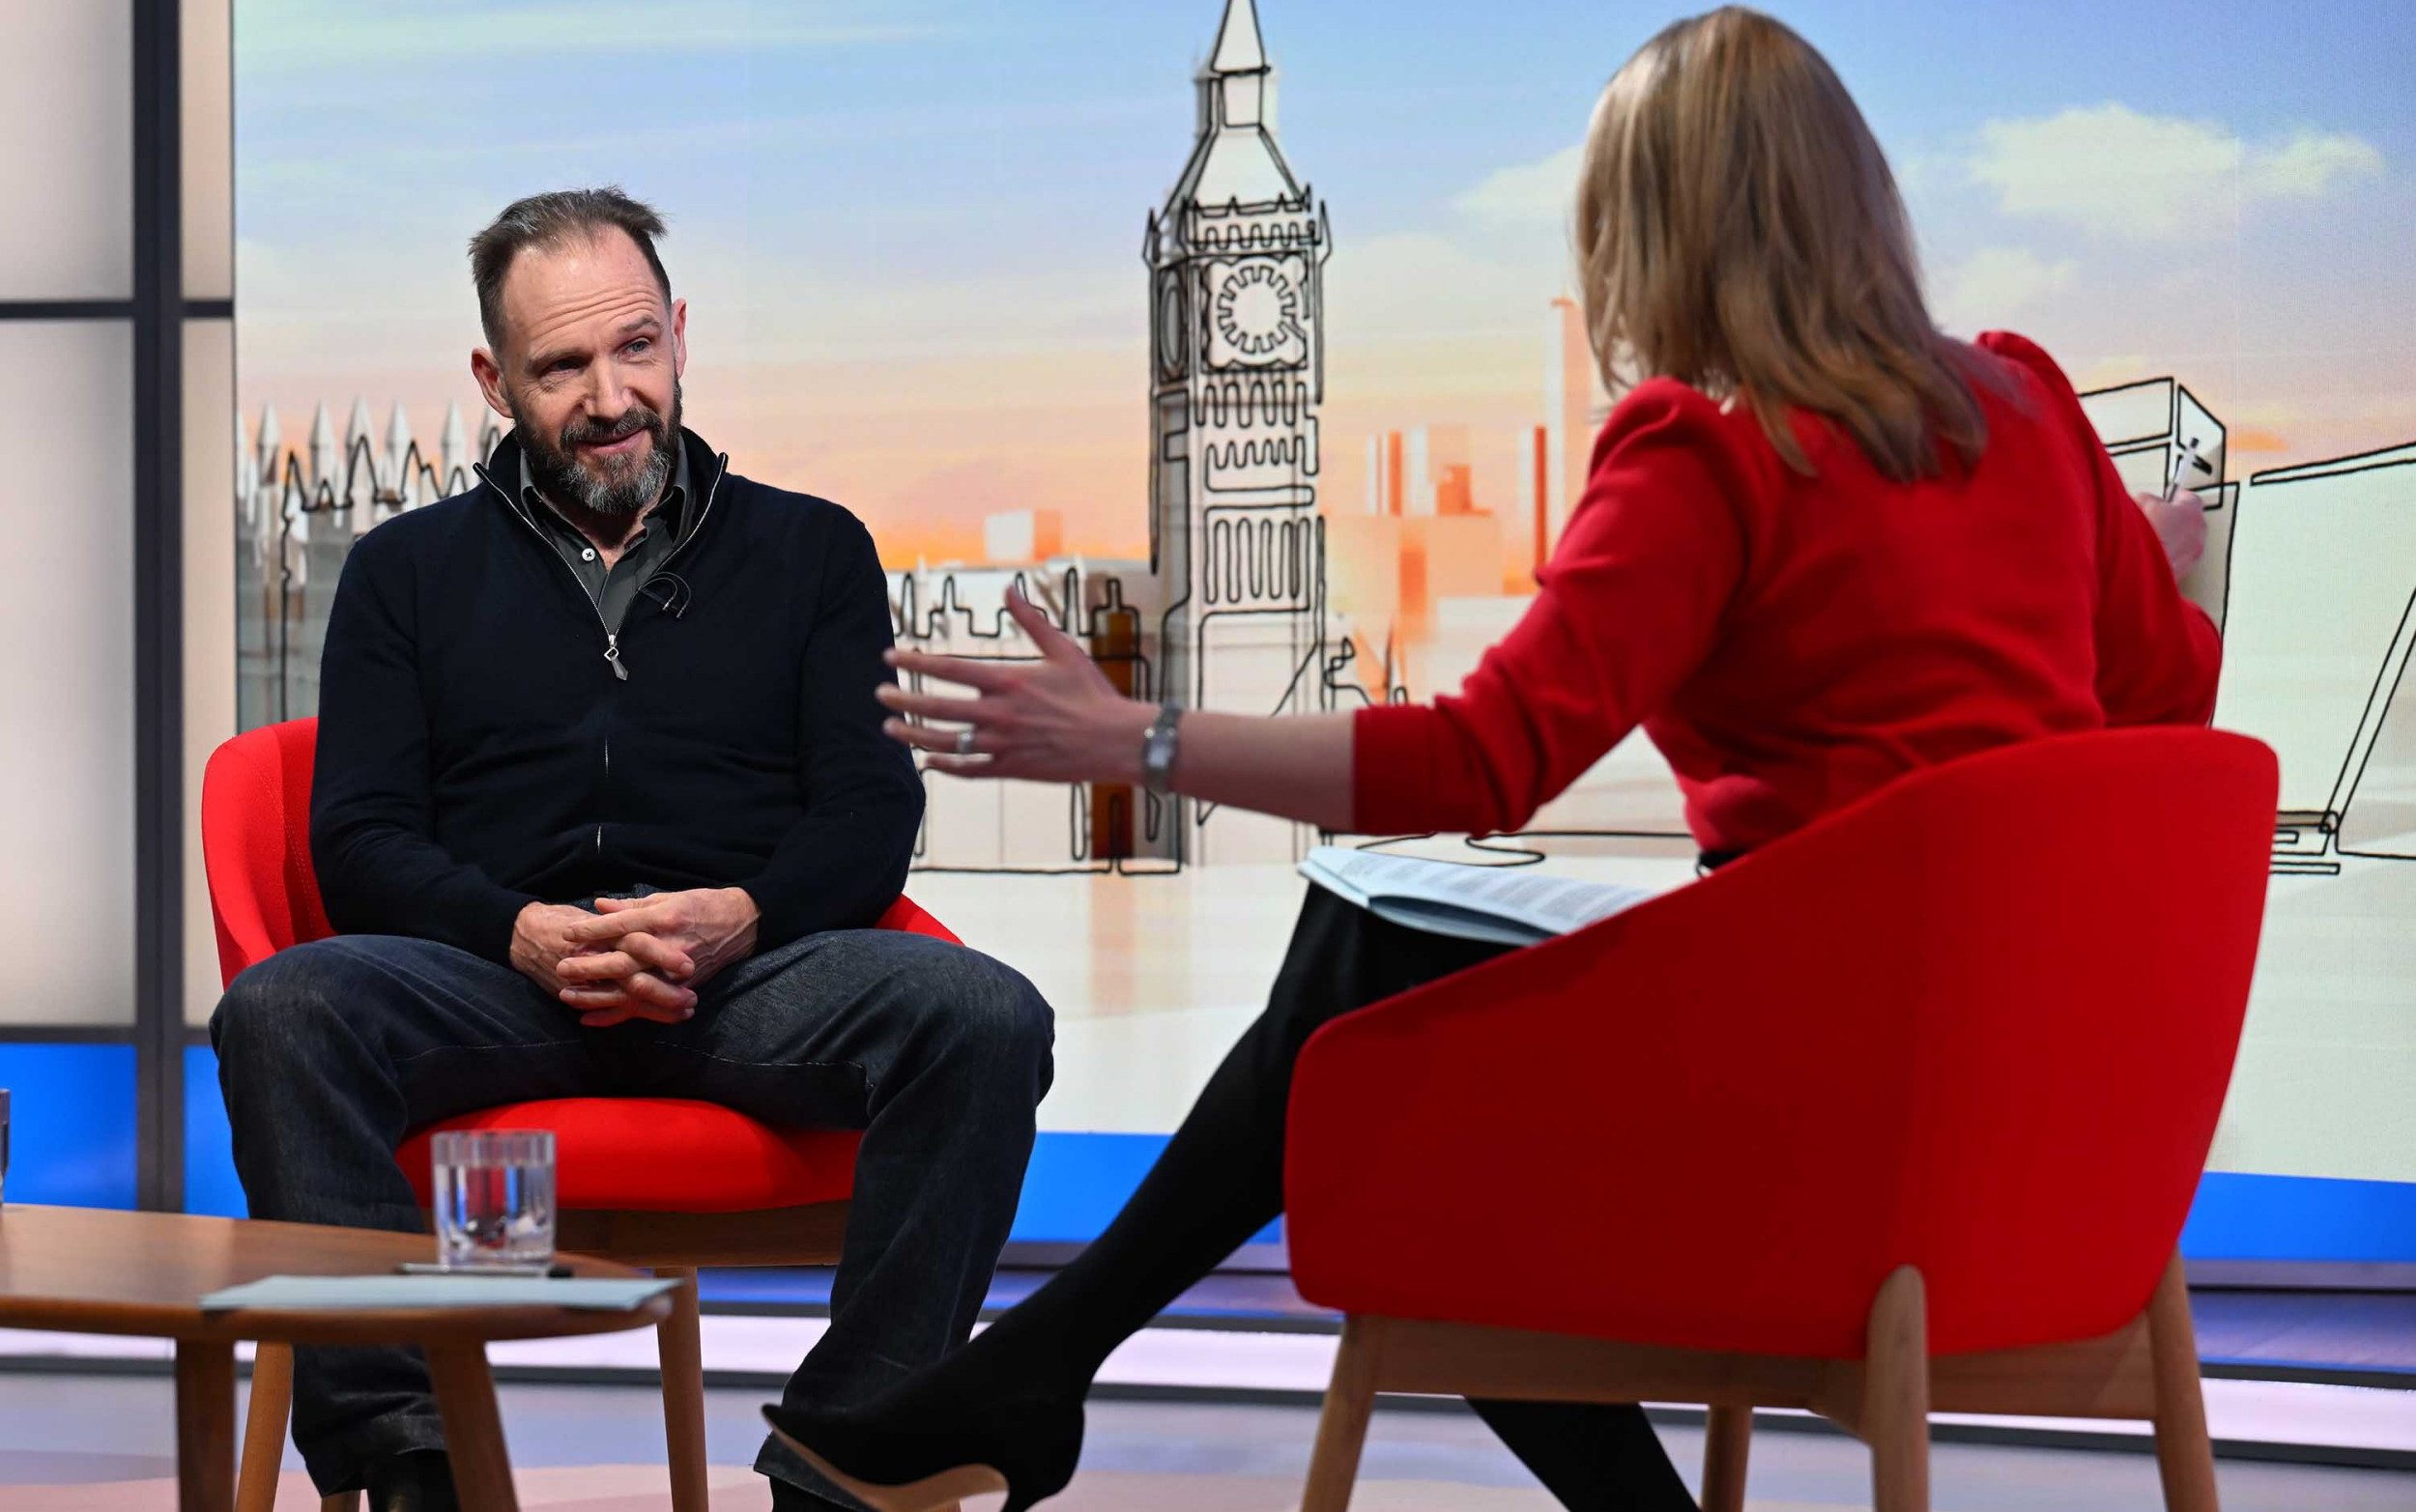 ralph fiennes: trigger warnings for ‘soft’ audiences should be ditched